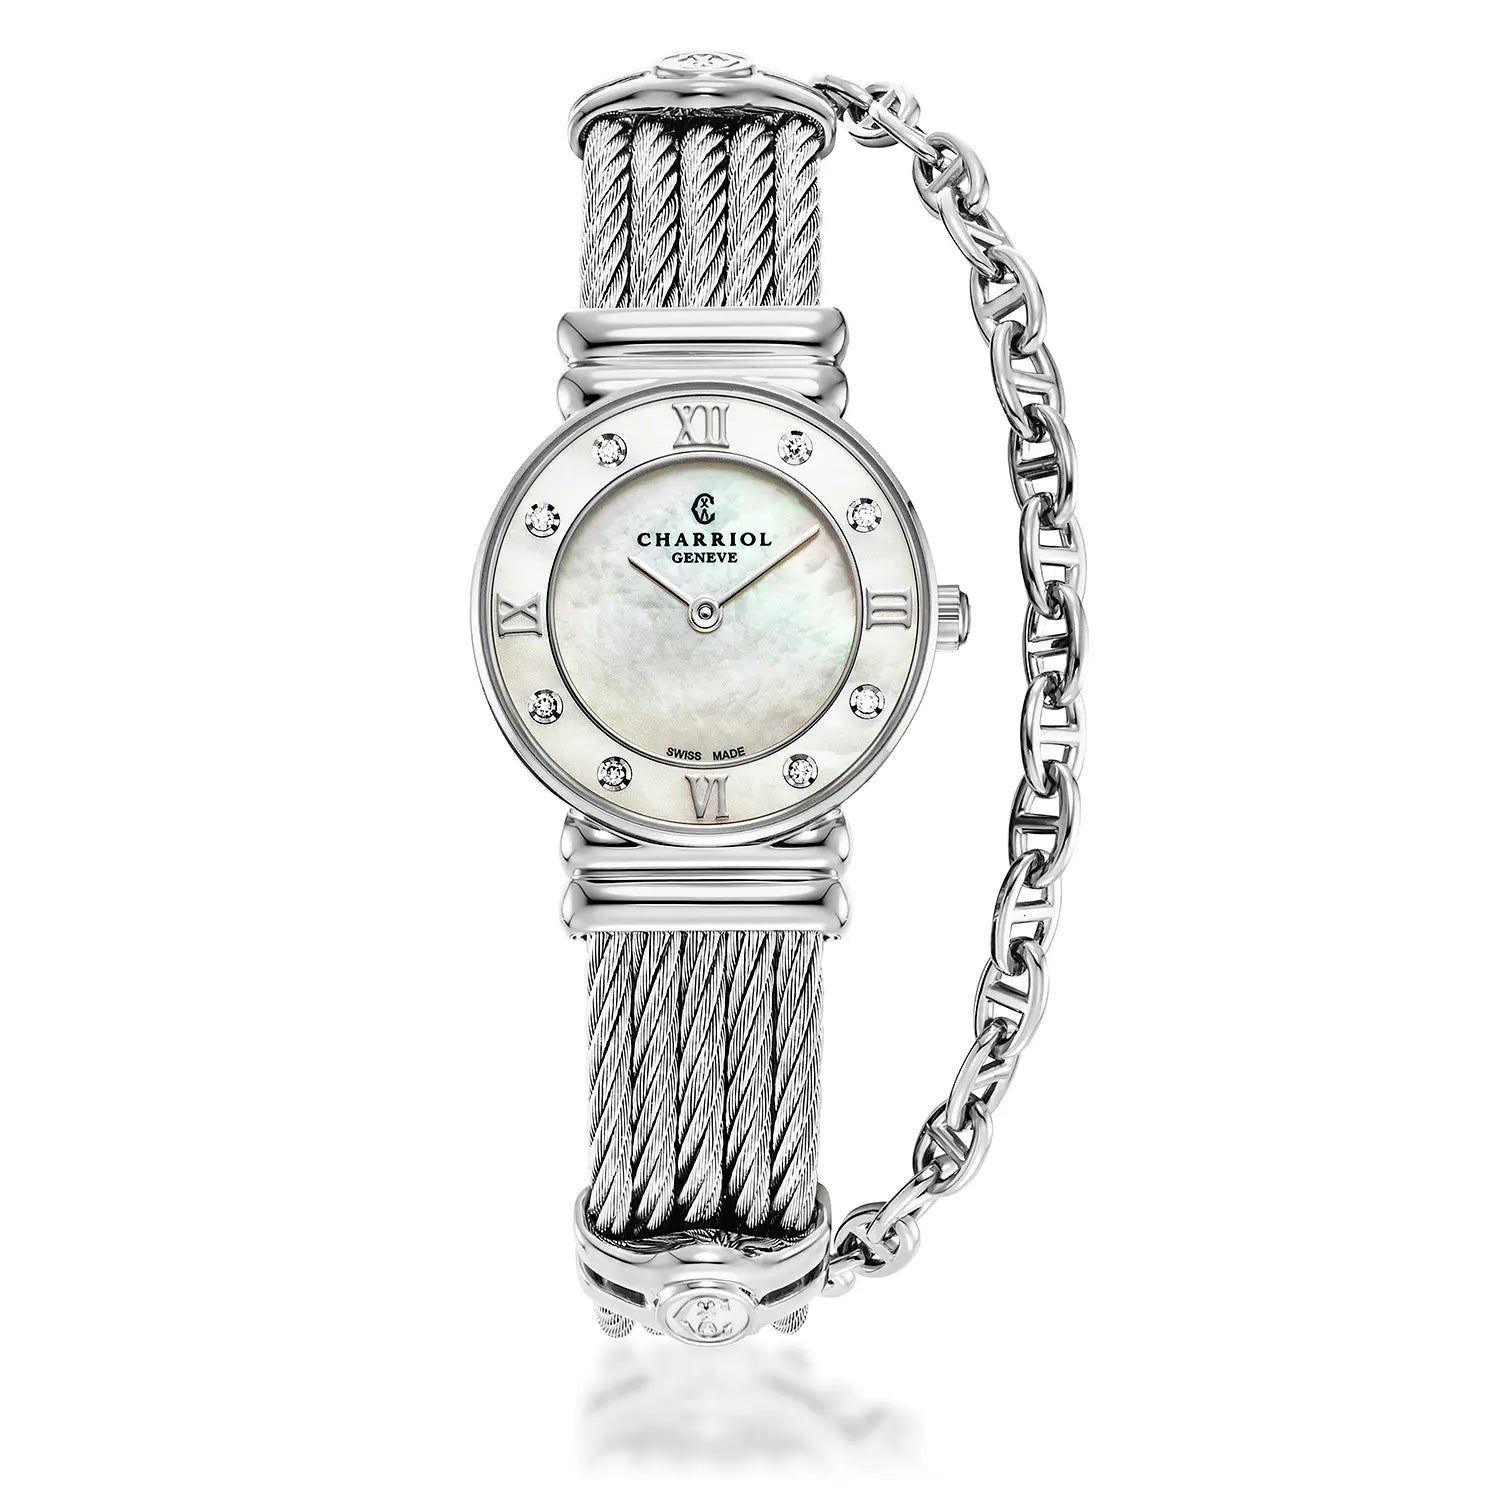 St Tropez Icon 24.5mm Watch Stainless Steel, Steel Cable, 8 Diamonds Bezel and White MOP Dial - Charriol Geneve -  Watch